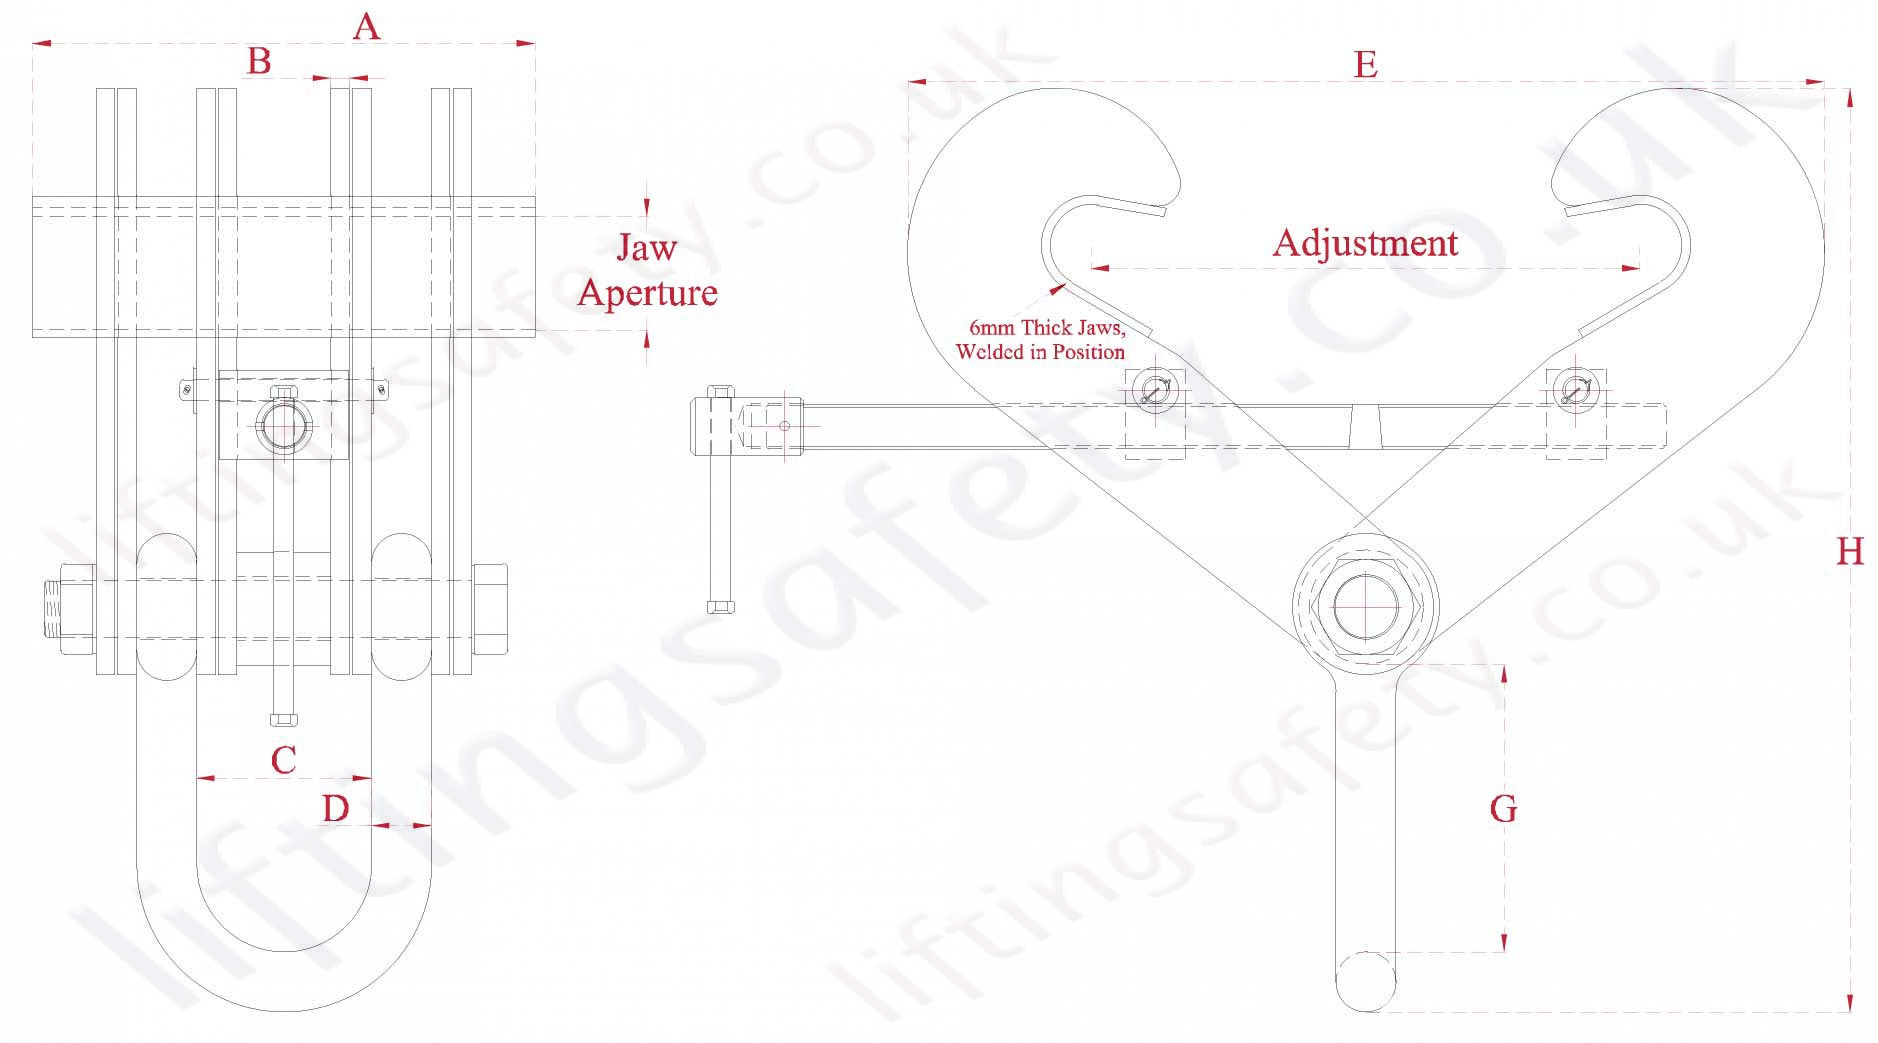 Superclamp Fixed Jaw Adjustable Girderdog Dimensions